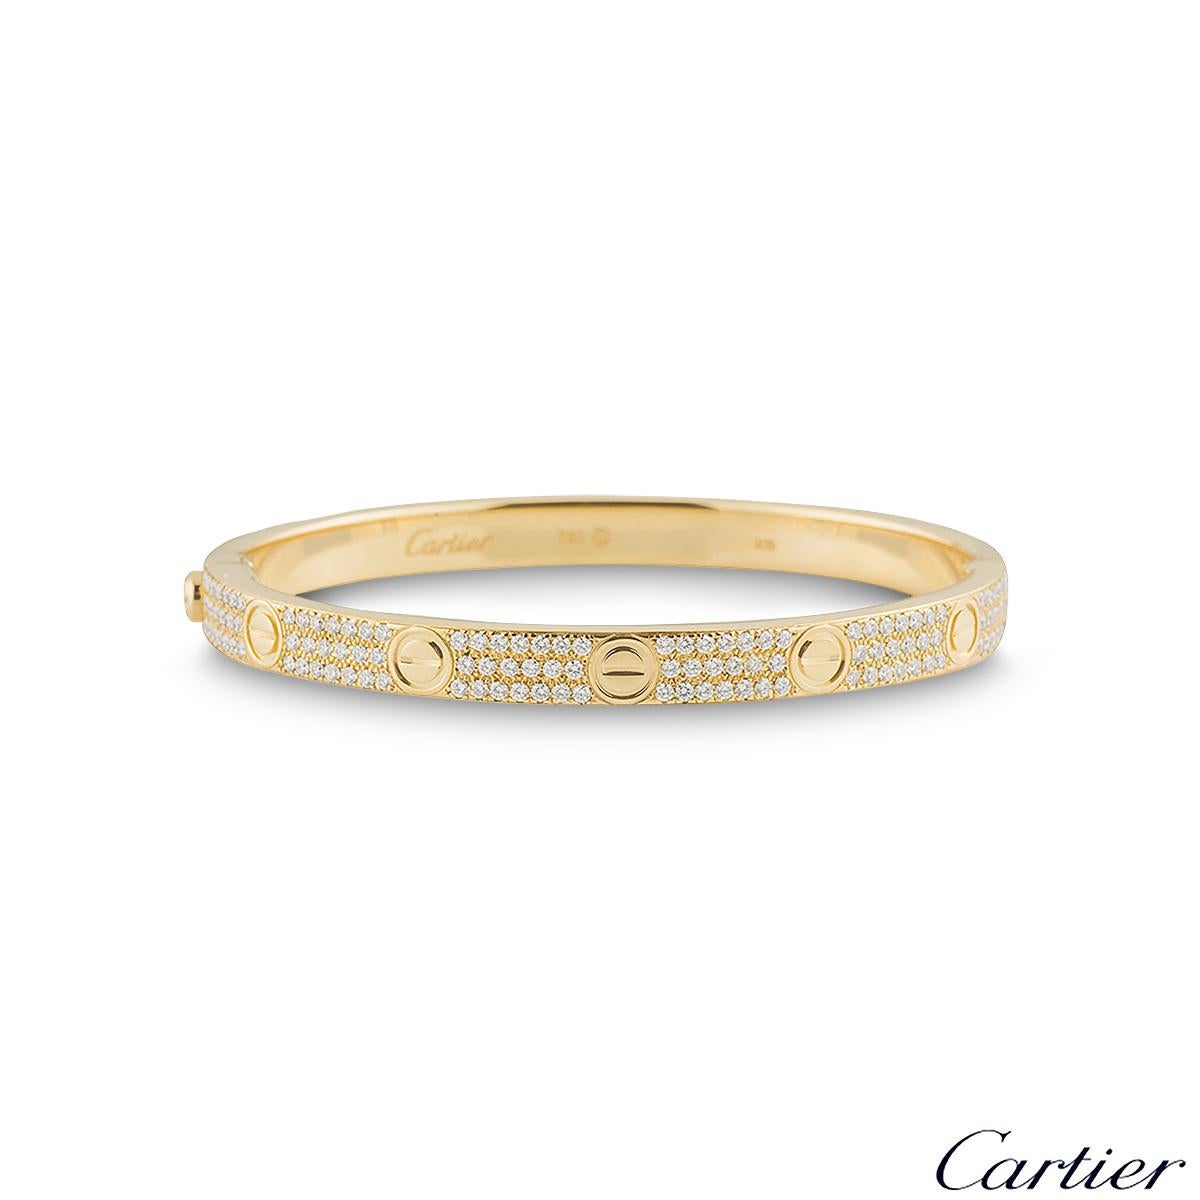 An iconic 18k yellow gold diamond bracelet by Cartier from the Love collection. The bracelet has the iconic screw motif displayed around the outer edge with 204 round brilliant cut diamonds pave set between each screw motif. The total diamond weight